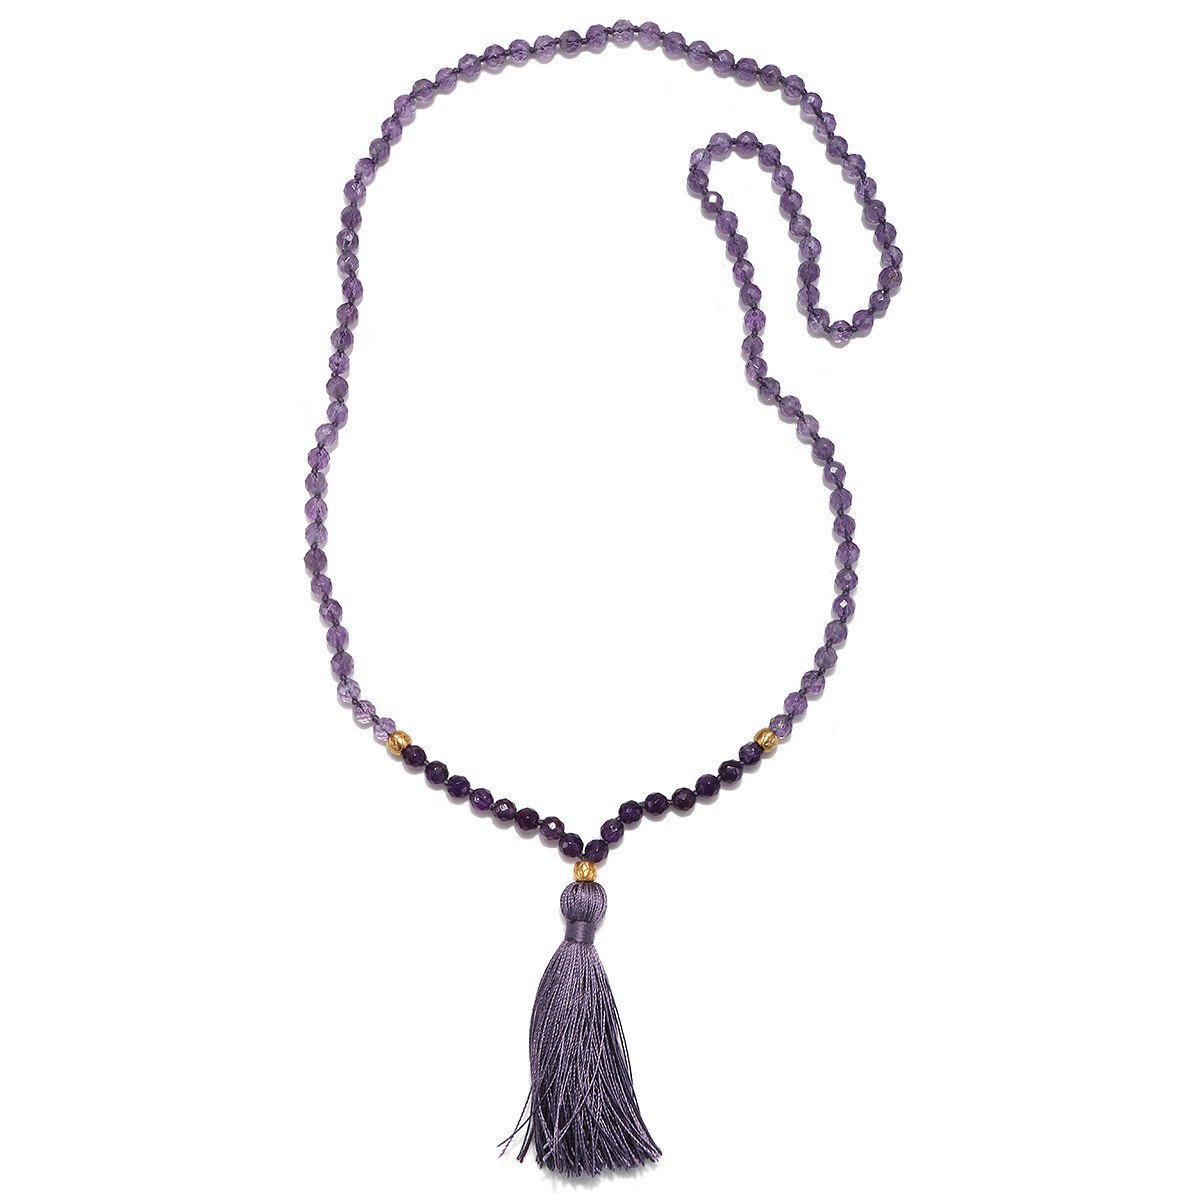 Best Price Of 108 Beads Amethyst Beaded Mala Necklace